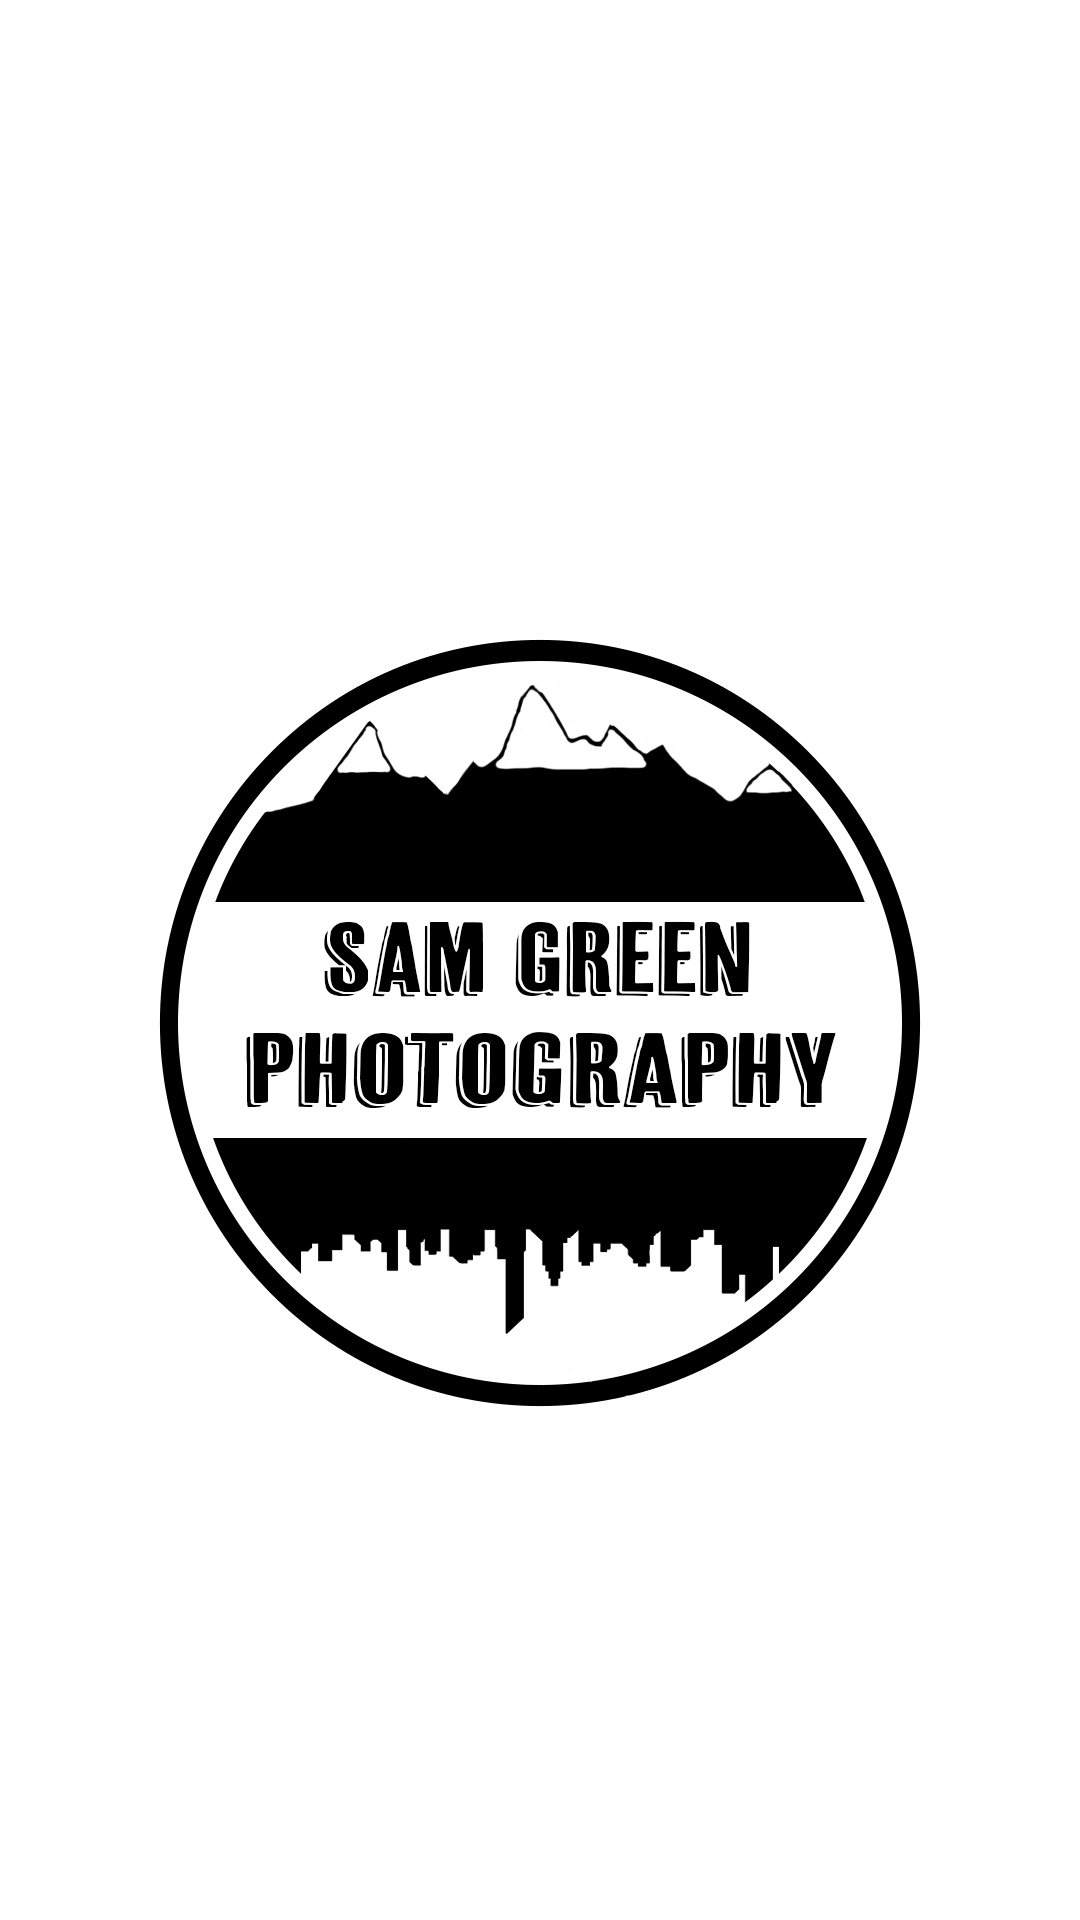 Sam Green Photography in Hannover